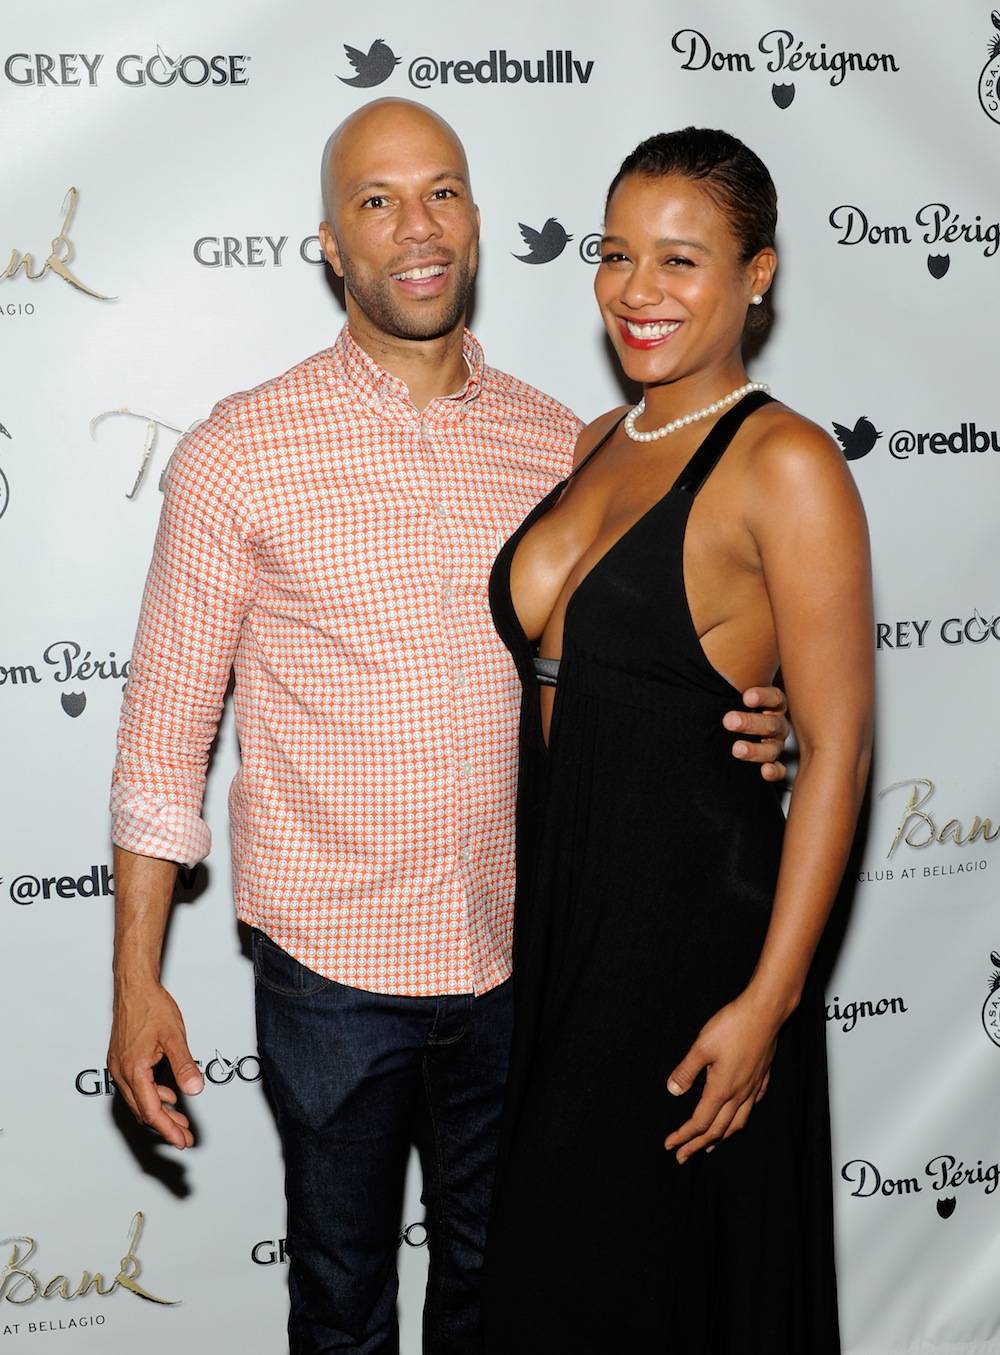 Common Celebrates New Year’s Eve At The Bank Nightclub At Bellagio In Las Vegas